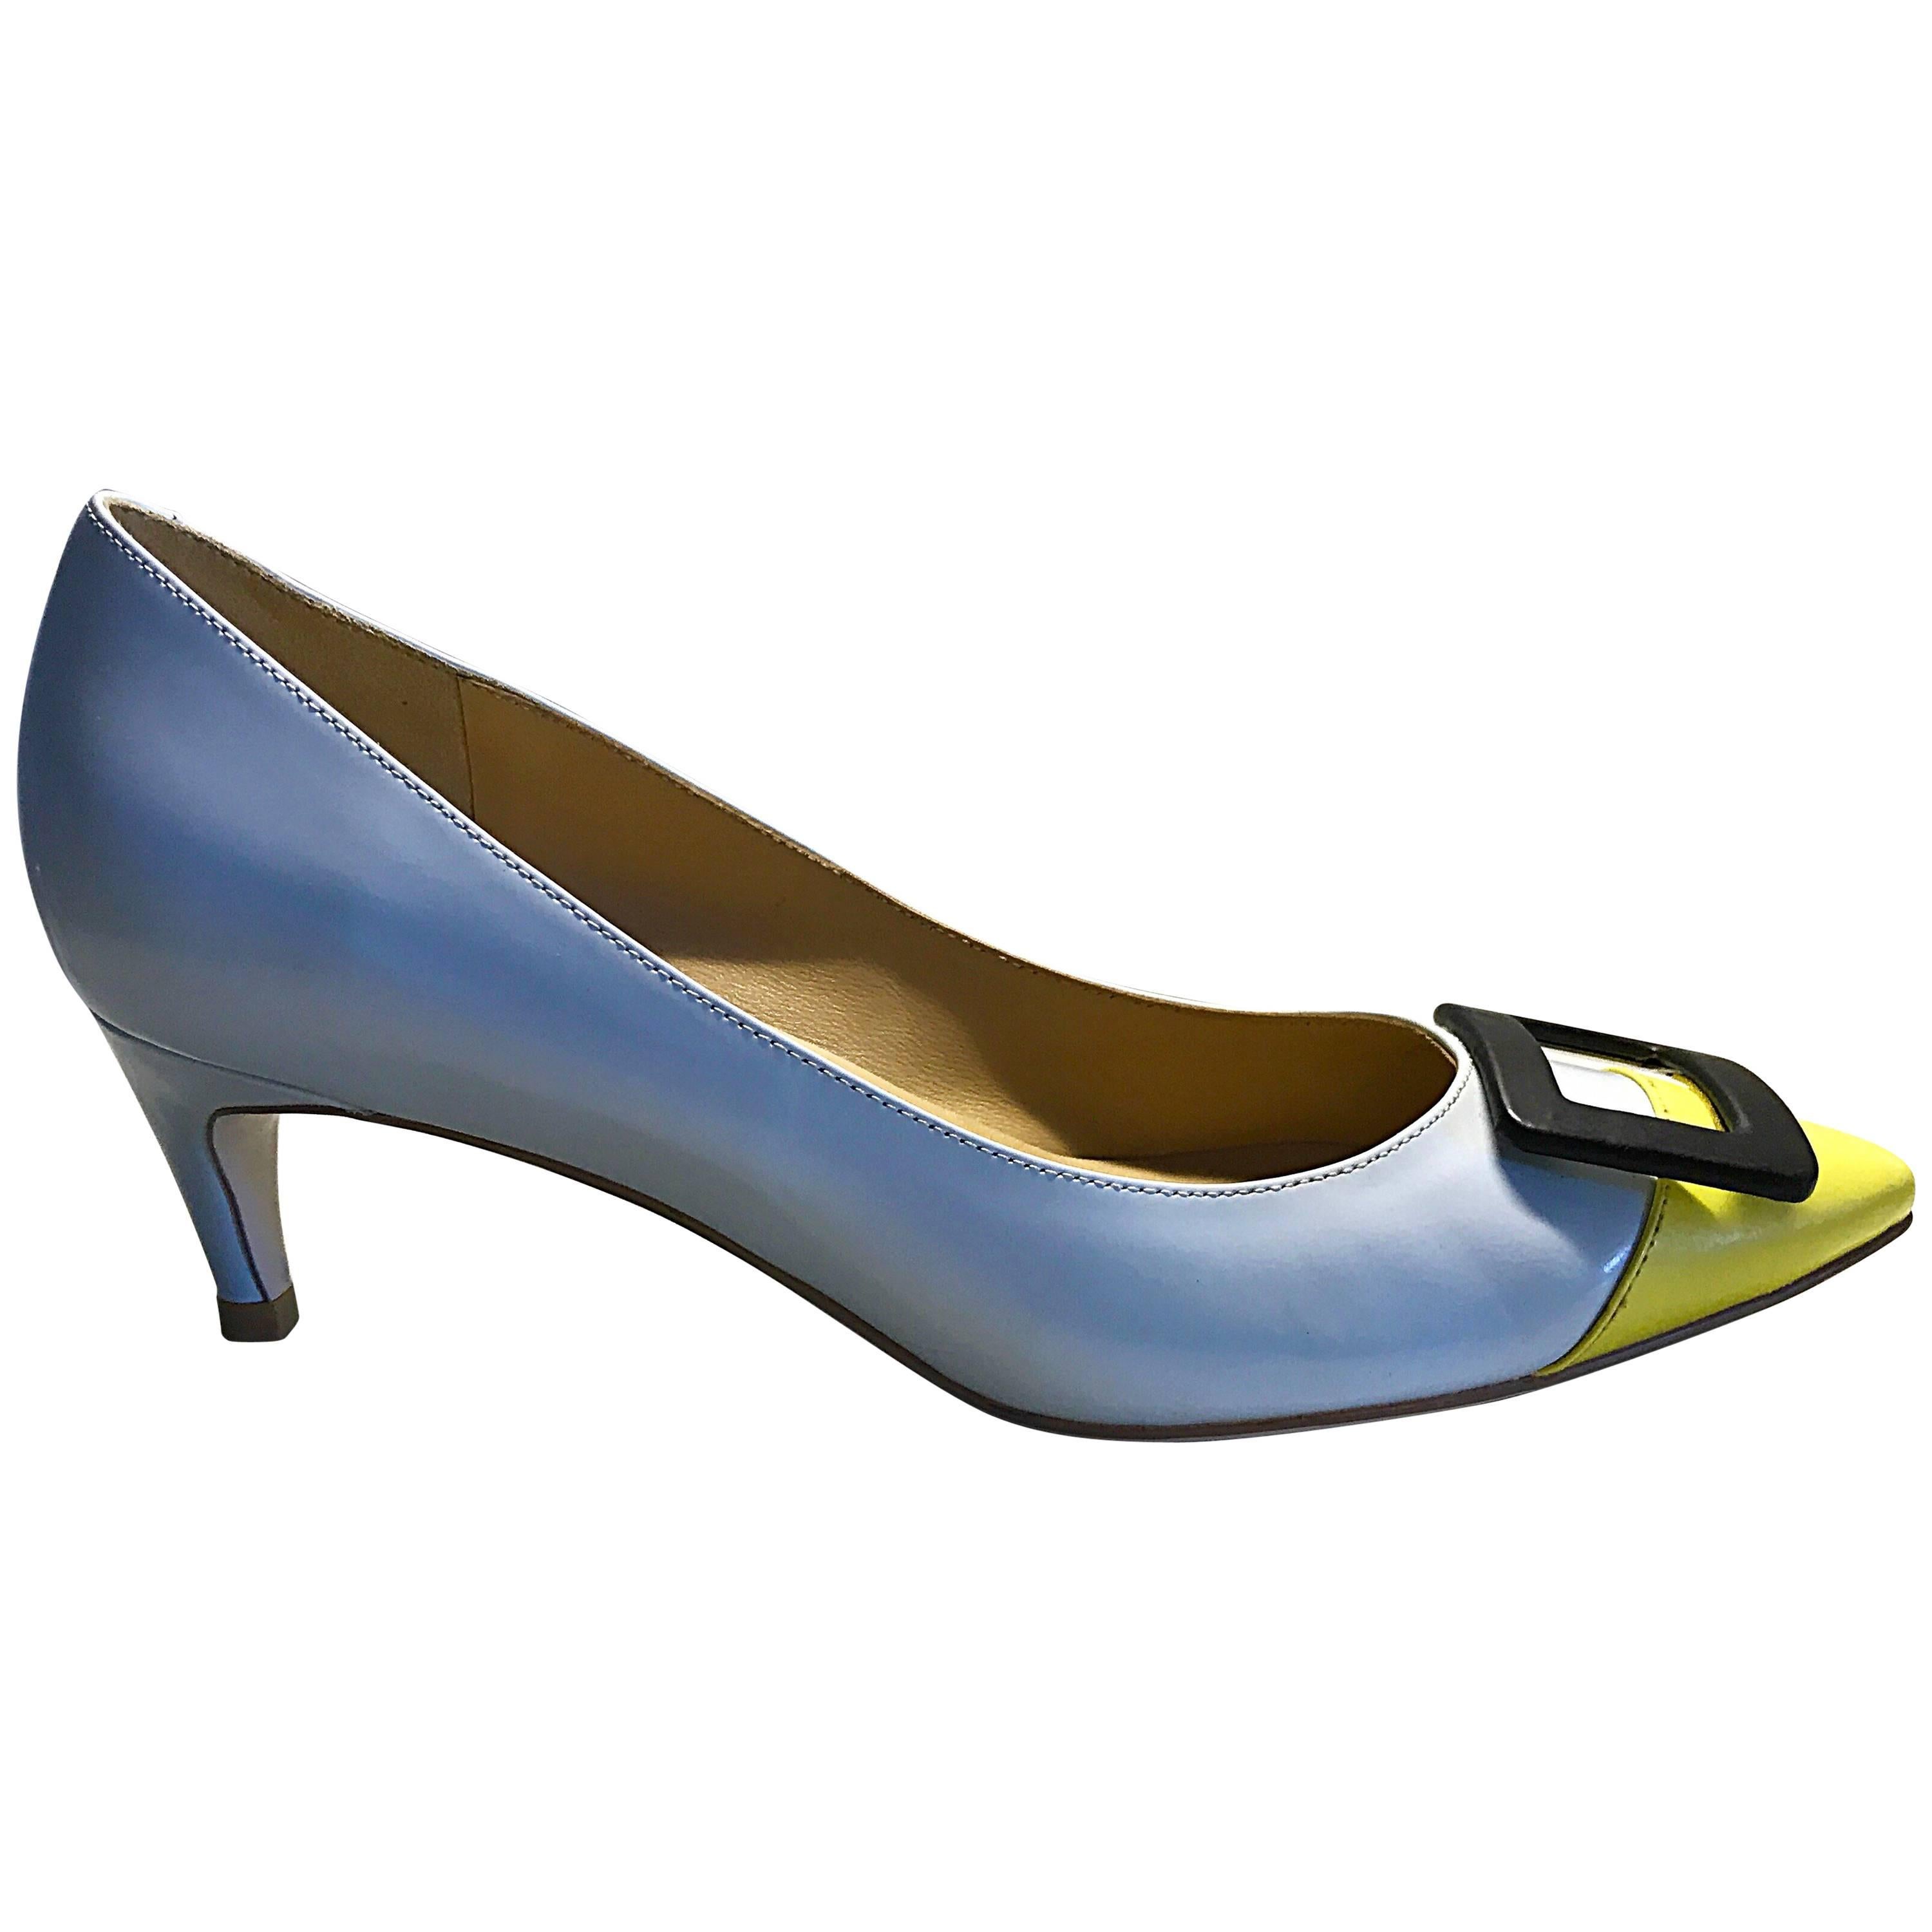 Roger Vivier Size 37 / 7 Pale Blue and Yellow Low Heel Buckle Shoes / Pumps